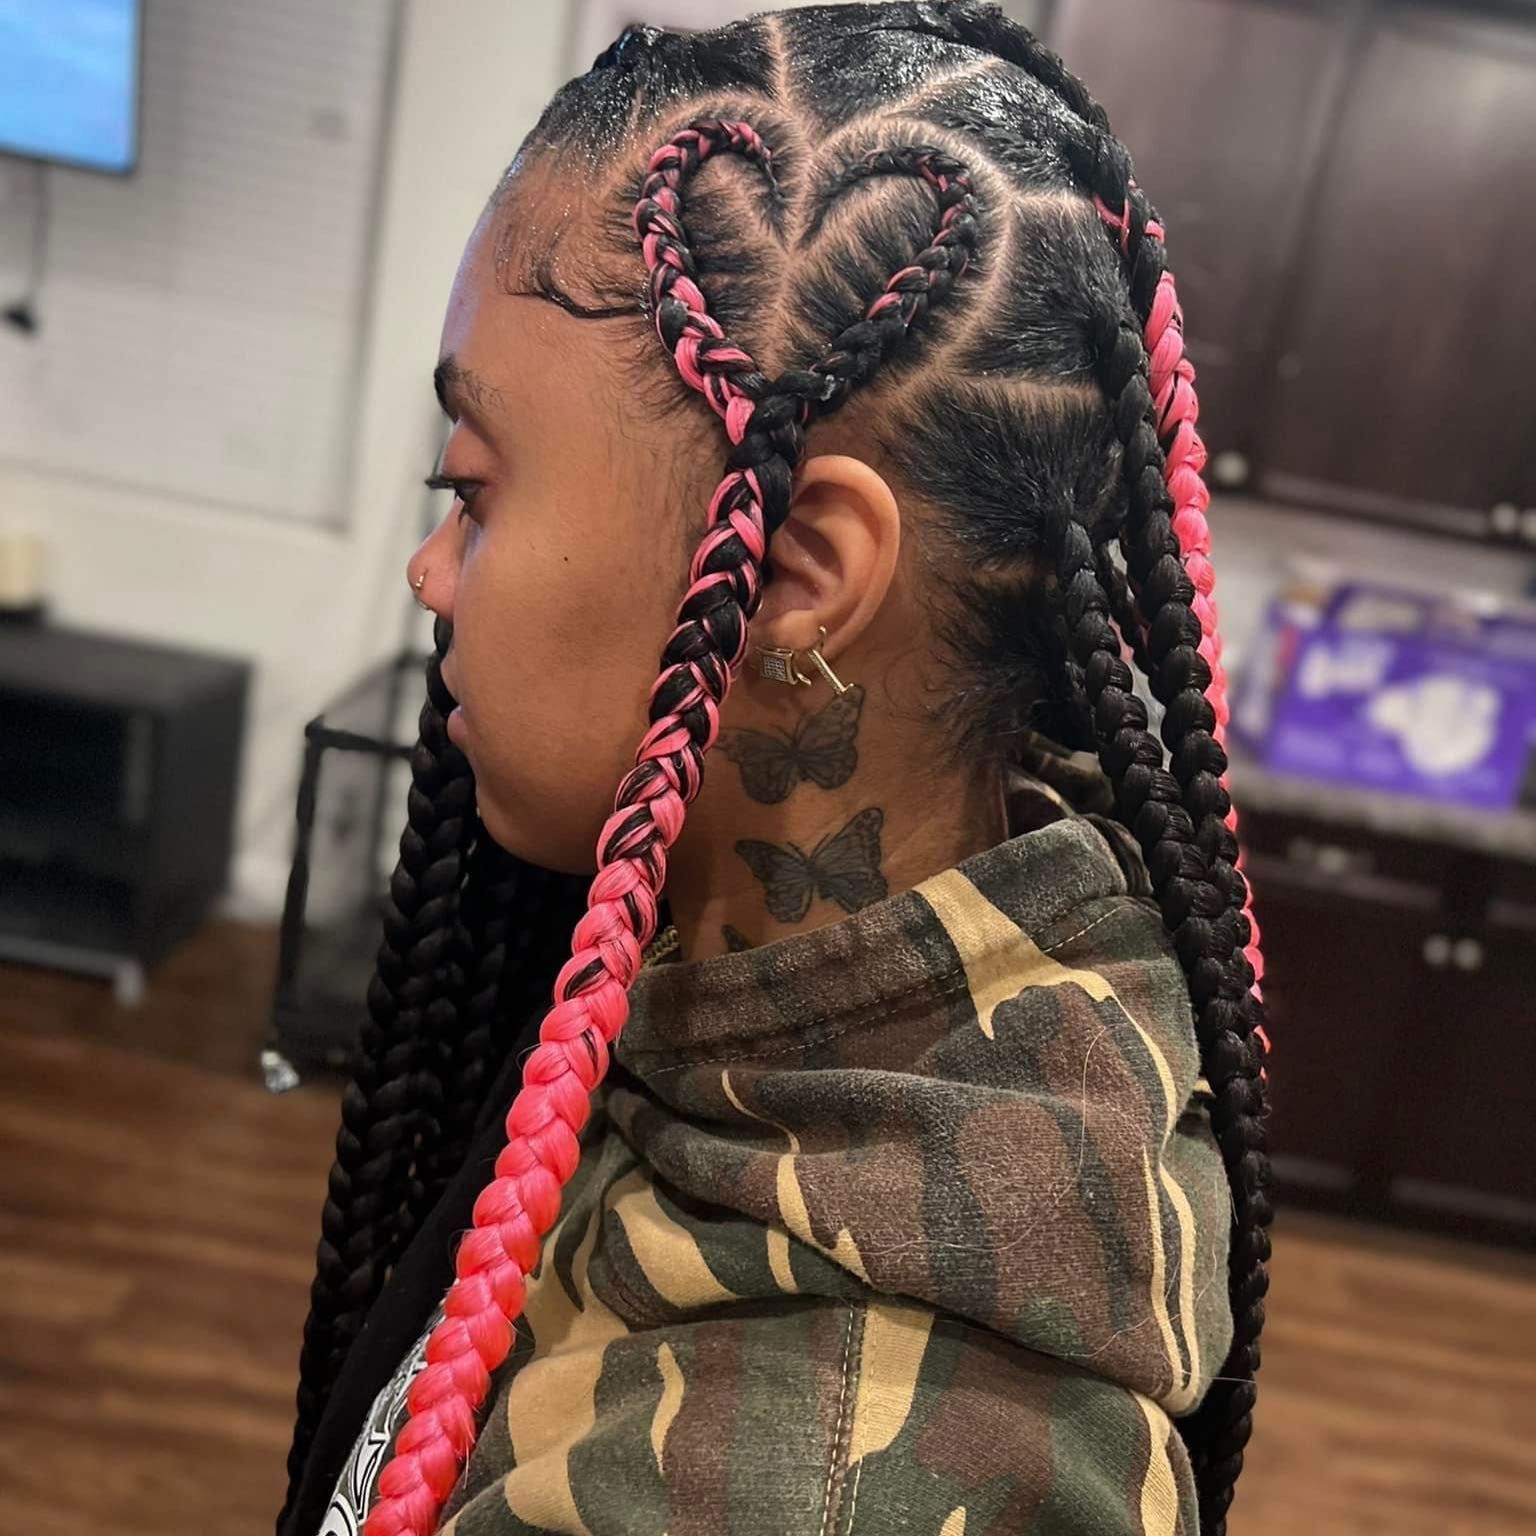 Kids Corn Rows With Extensions (ages 5-11) portfolio